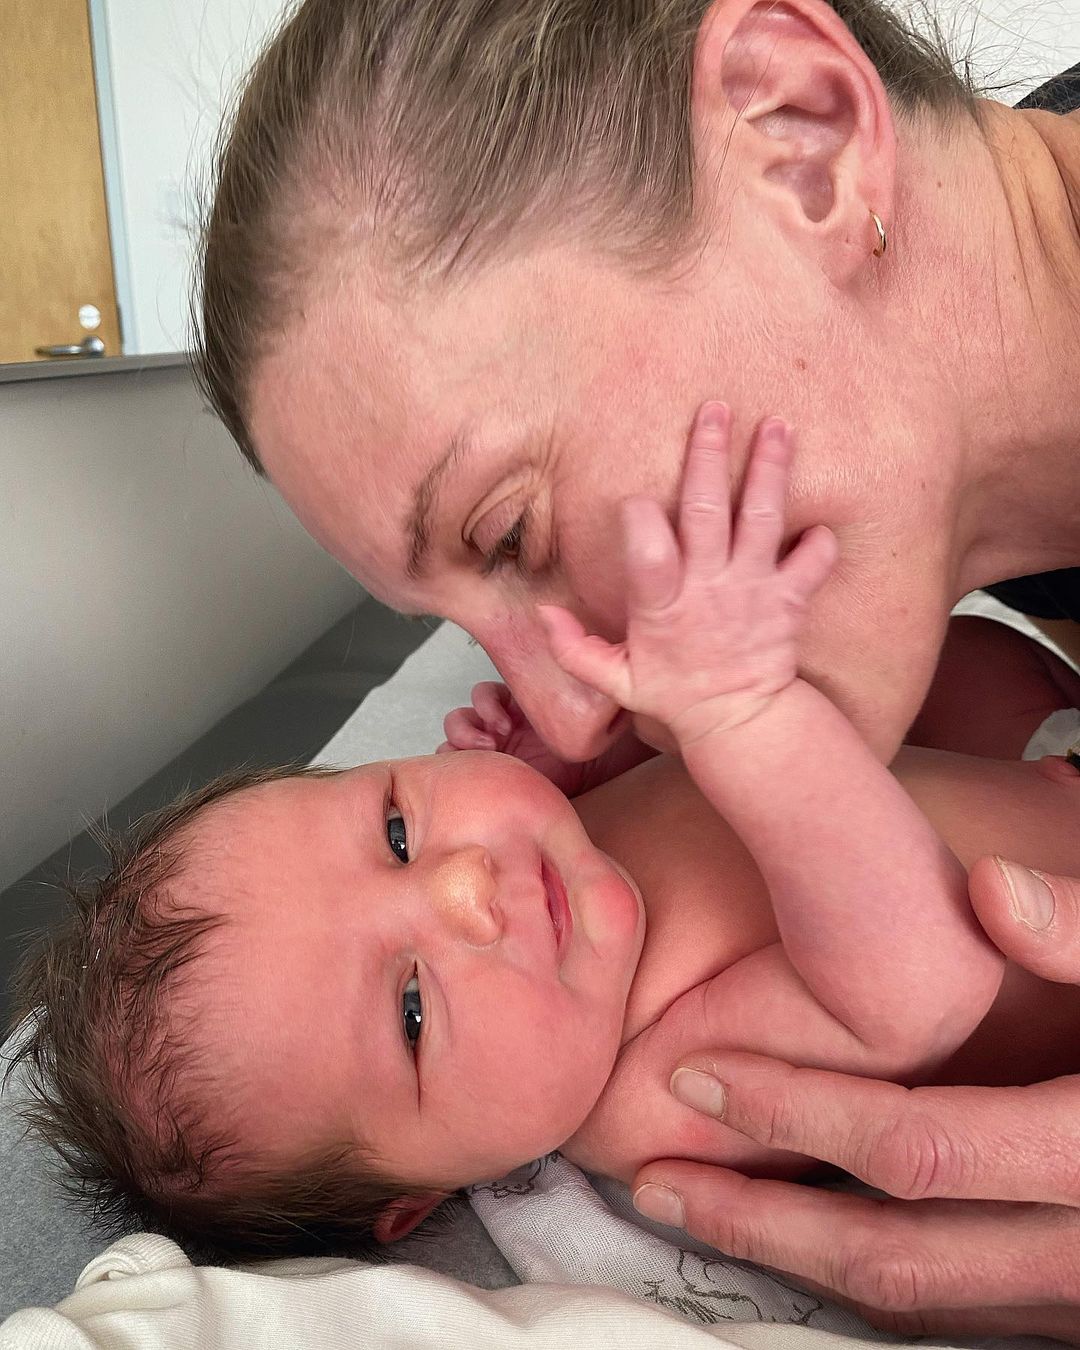 Kate Shackhoff announced the birth of her daughter on Instagram